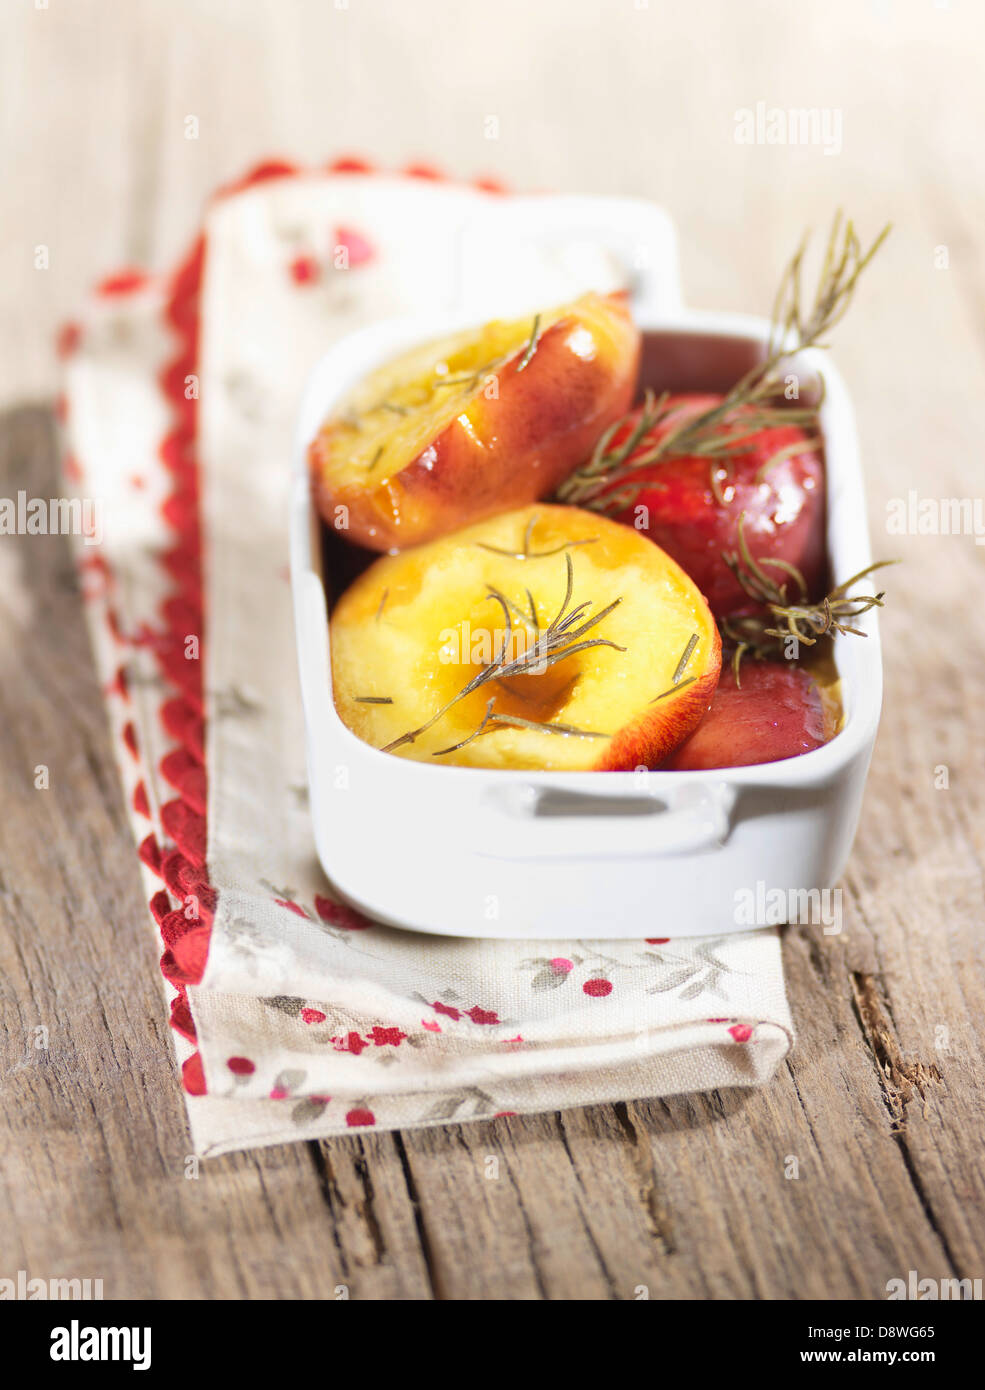 Roasted peaches with rosemary Stock Photo